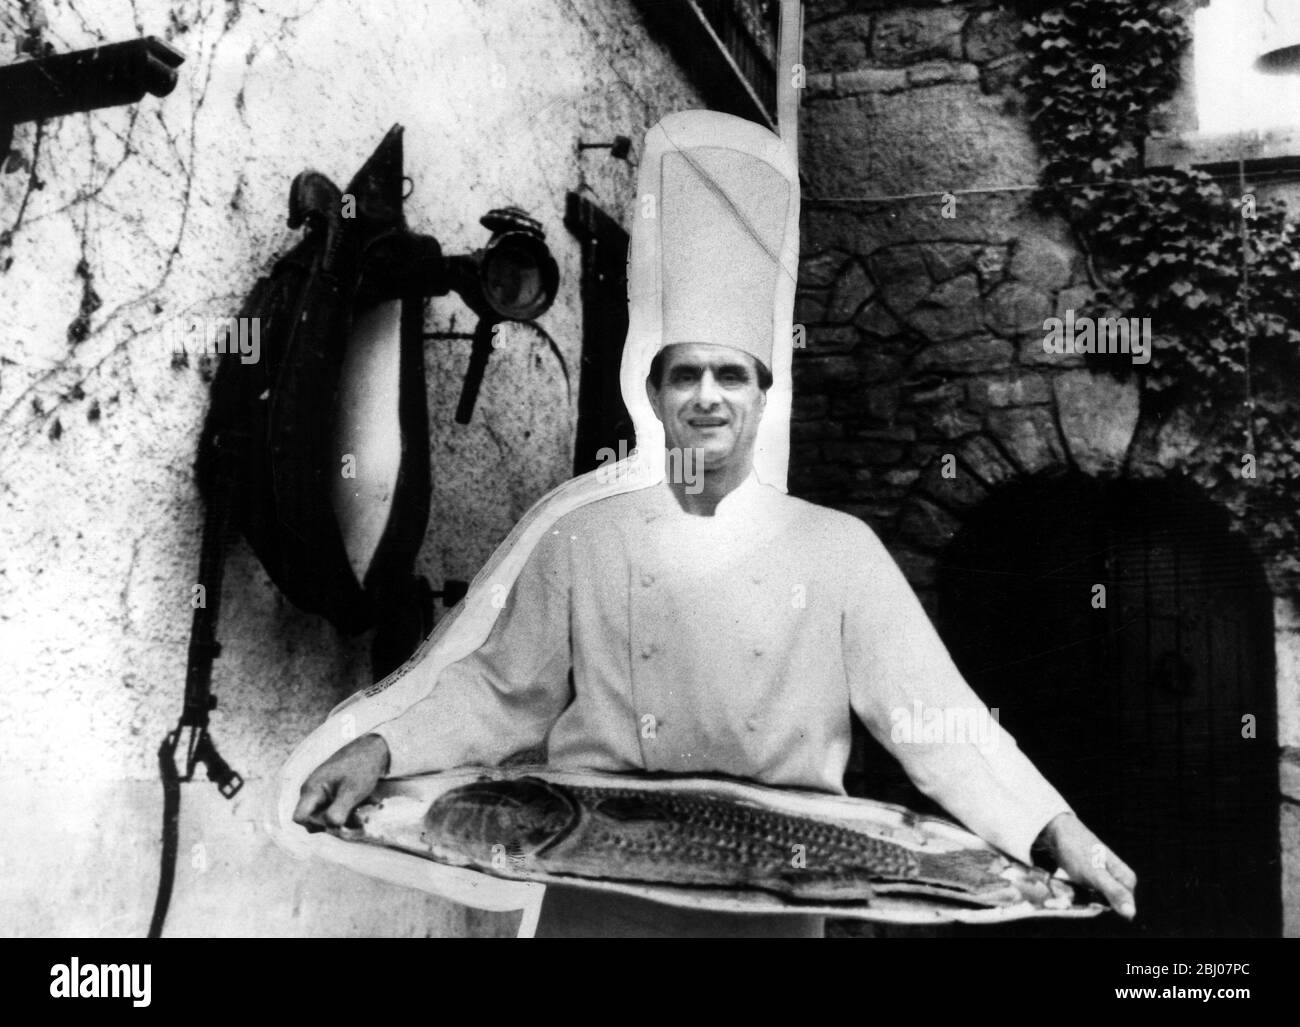 Chef Paul Bocuse poses with a giant fish on a platter in a rustic courtyard Stock Photo